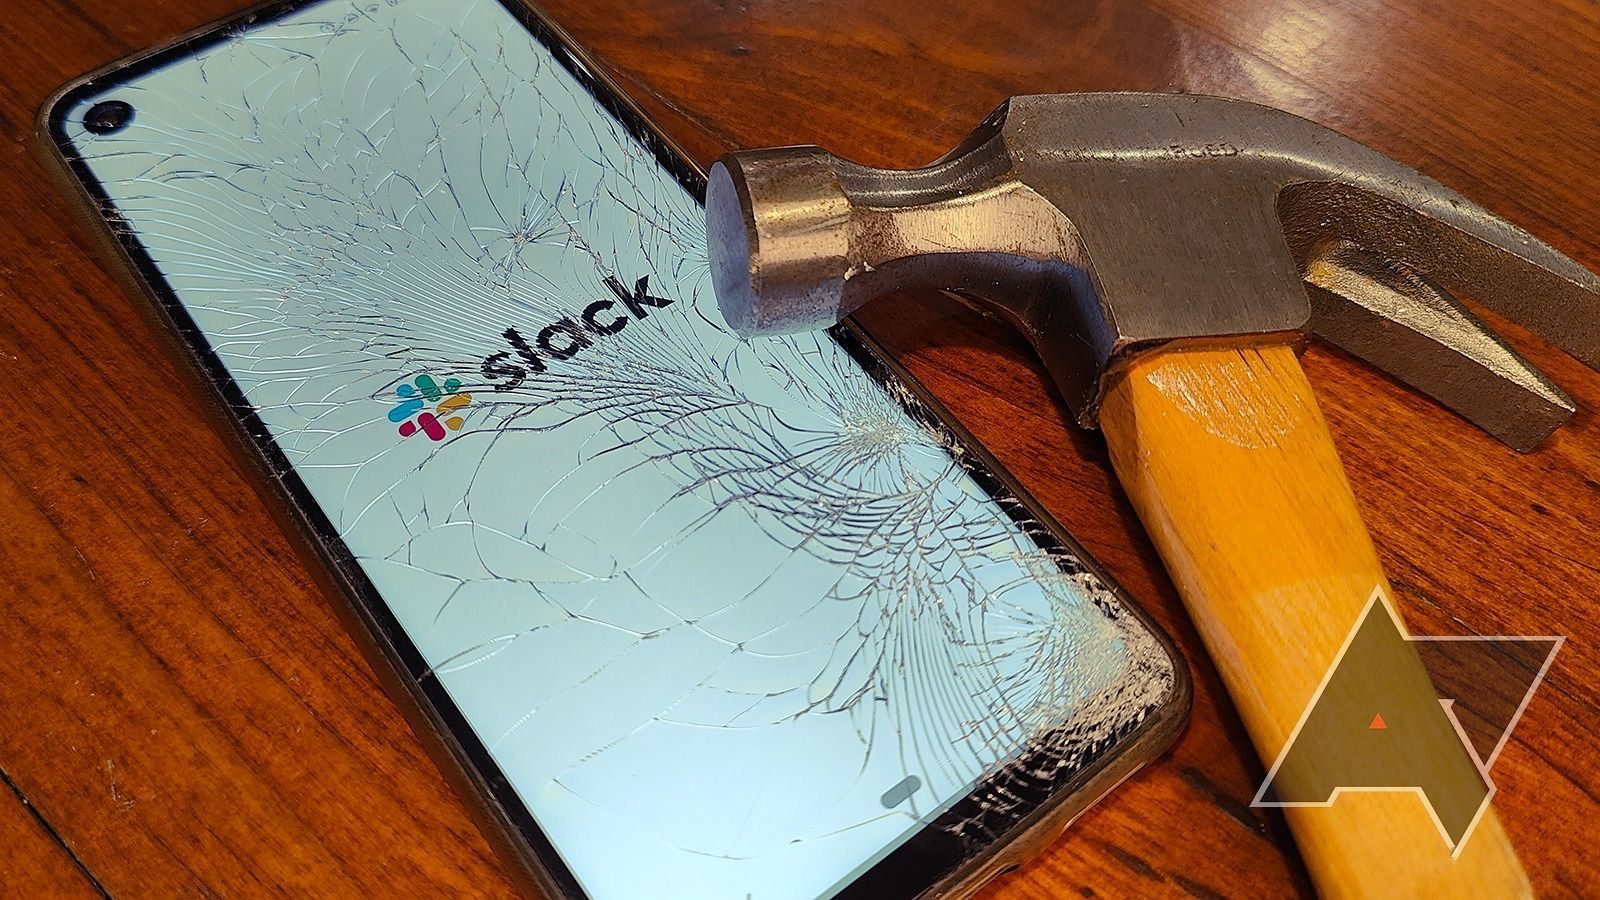 A smartphone displays the Slack logo through a cracked display while a hammer rests on the screen